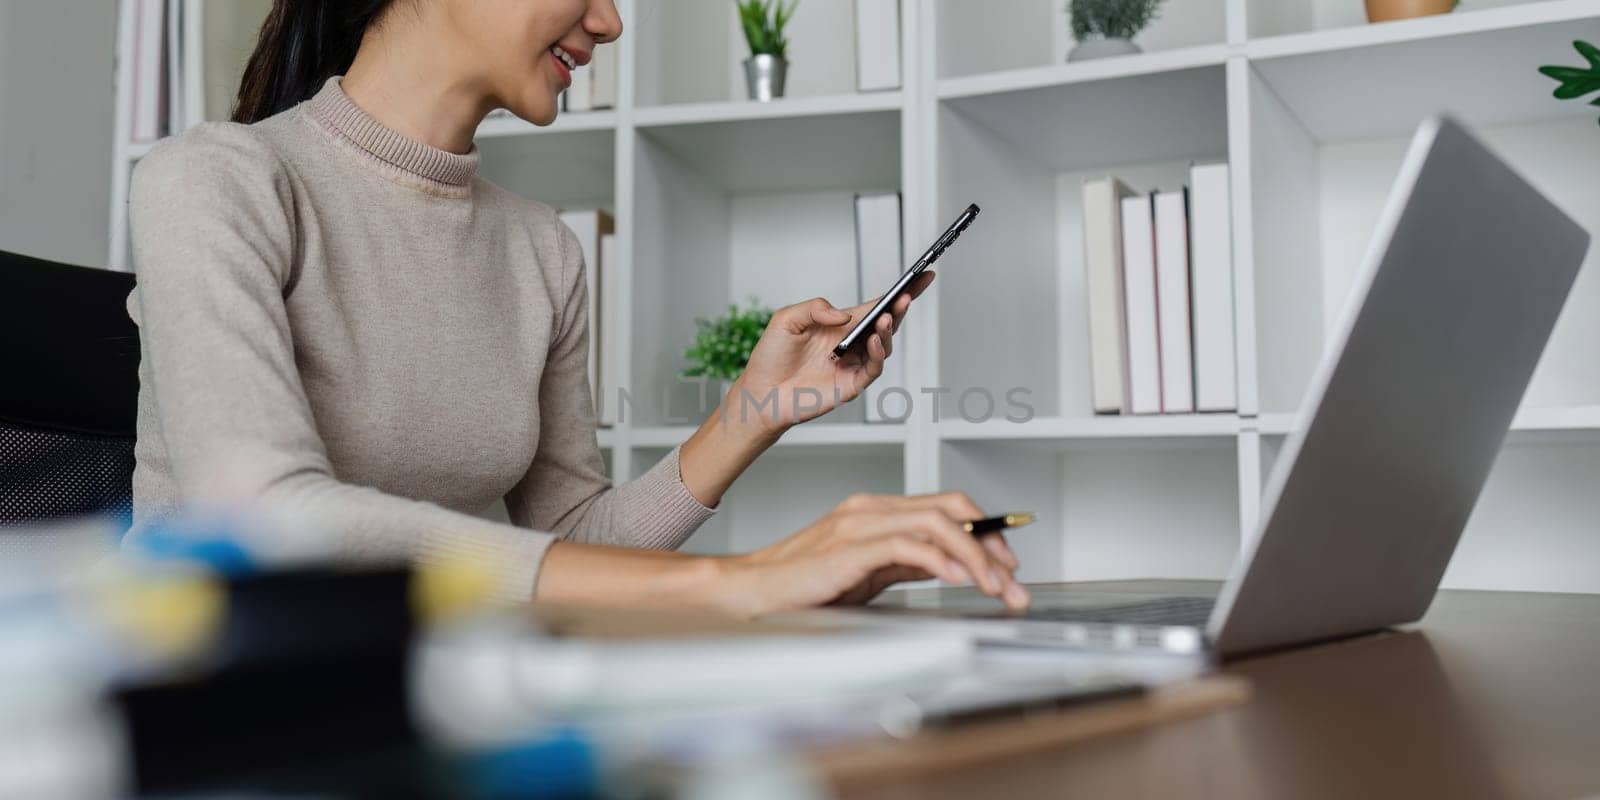 business woman using smartphone while working on laptop, synchronize data between computer and gadget at home, use corporate devices and business application by itchaznong